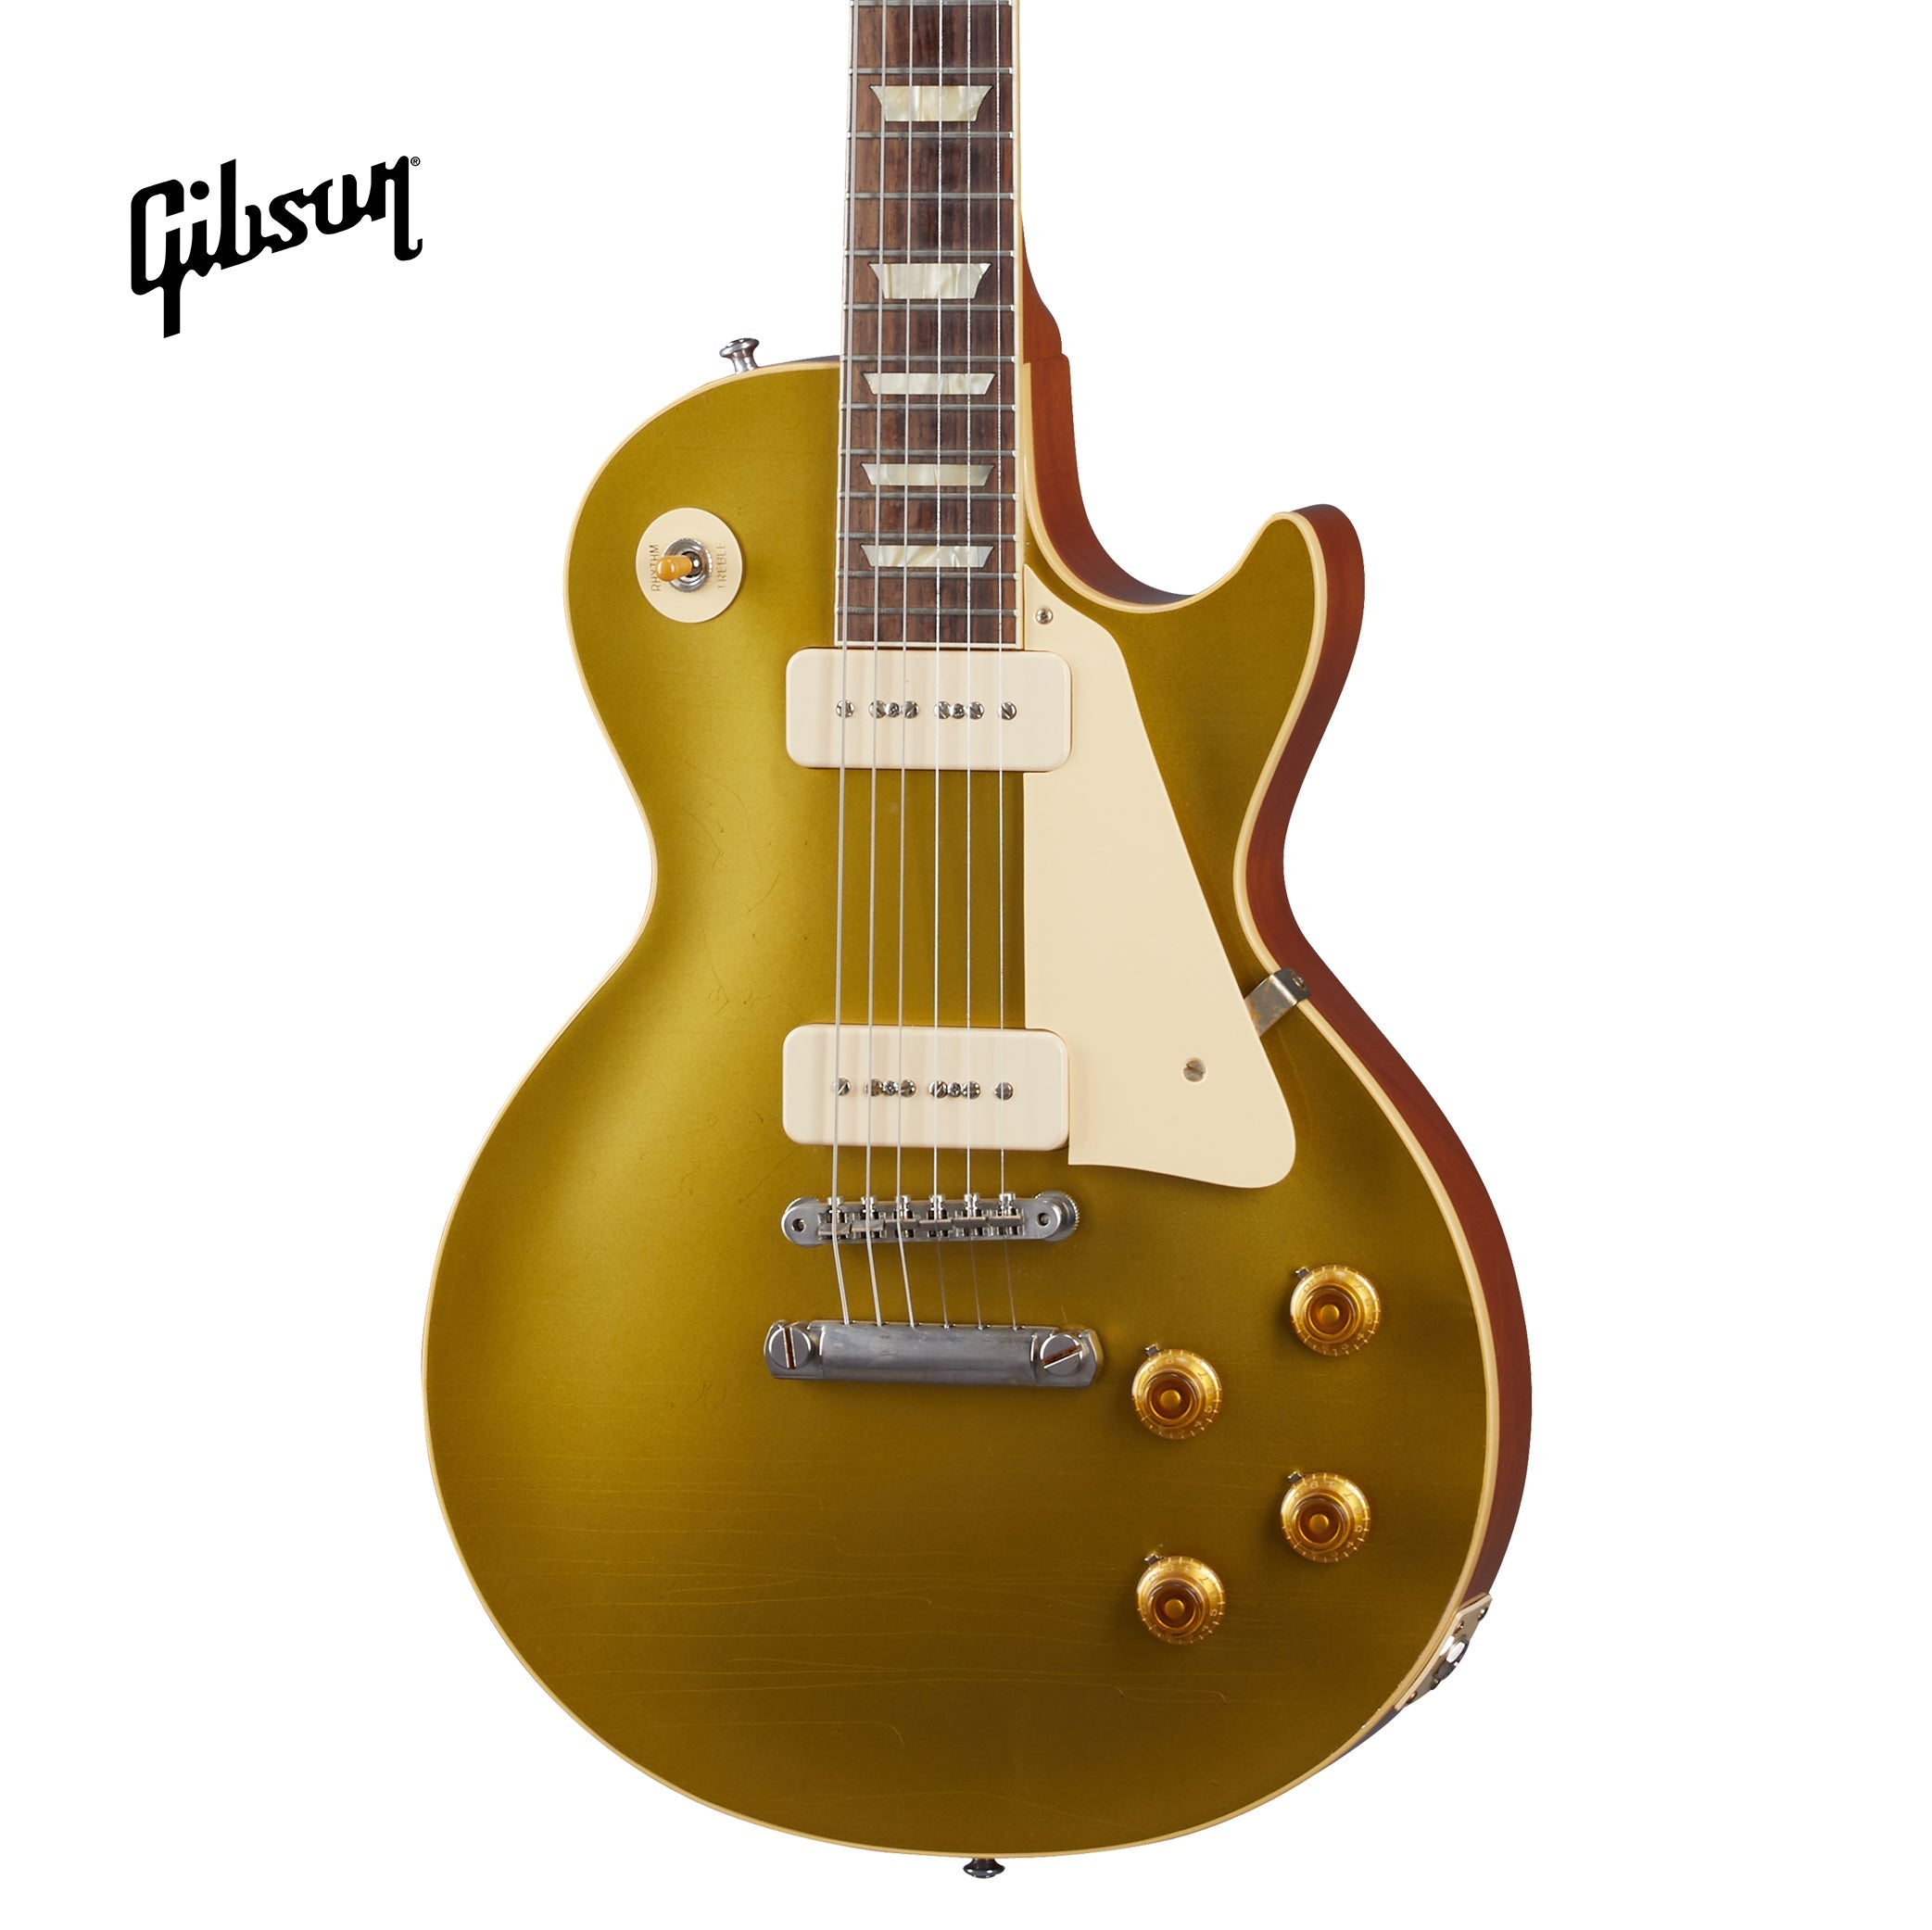 GIBSON 1956 LES PAUL GOLDTOP REISSUE ULTRA LIGHT AGED ELECTRIC GUITAR - DOUBLE GOLD